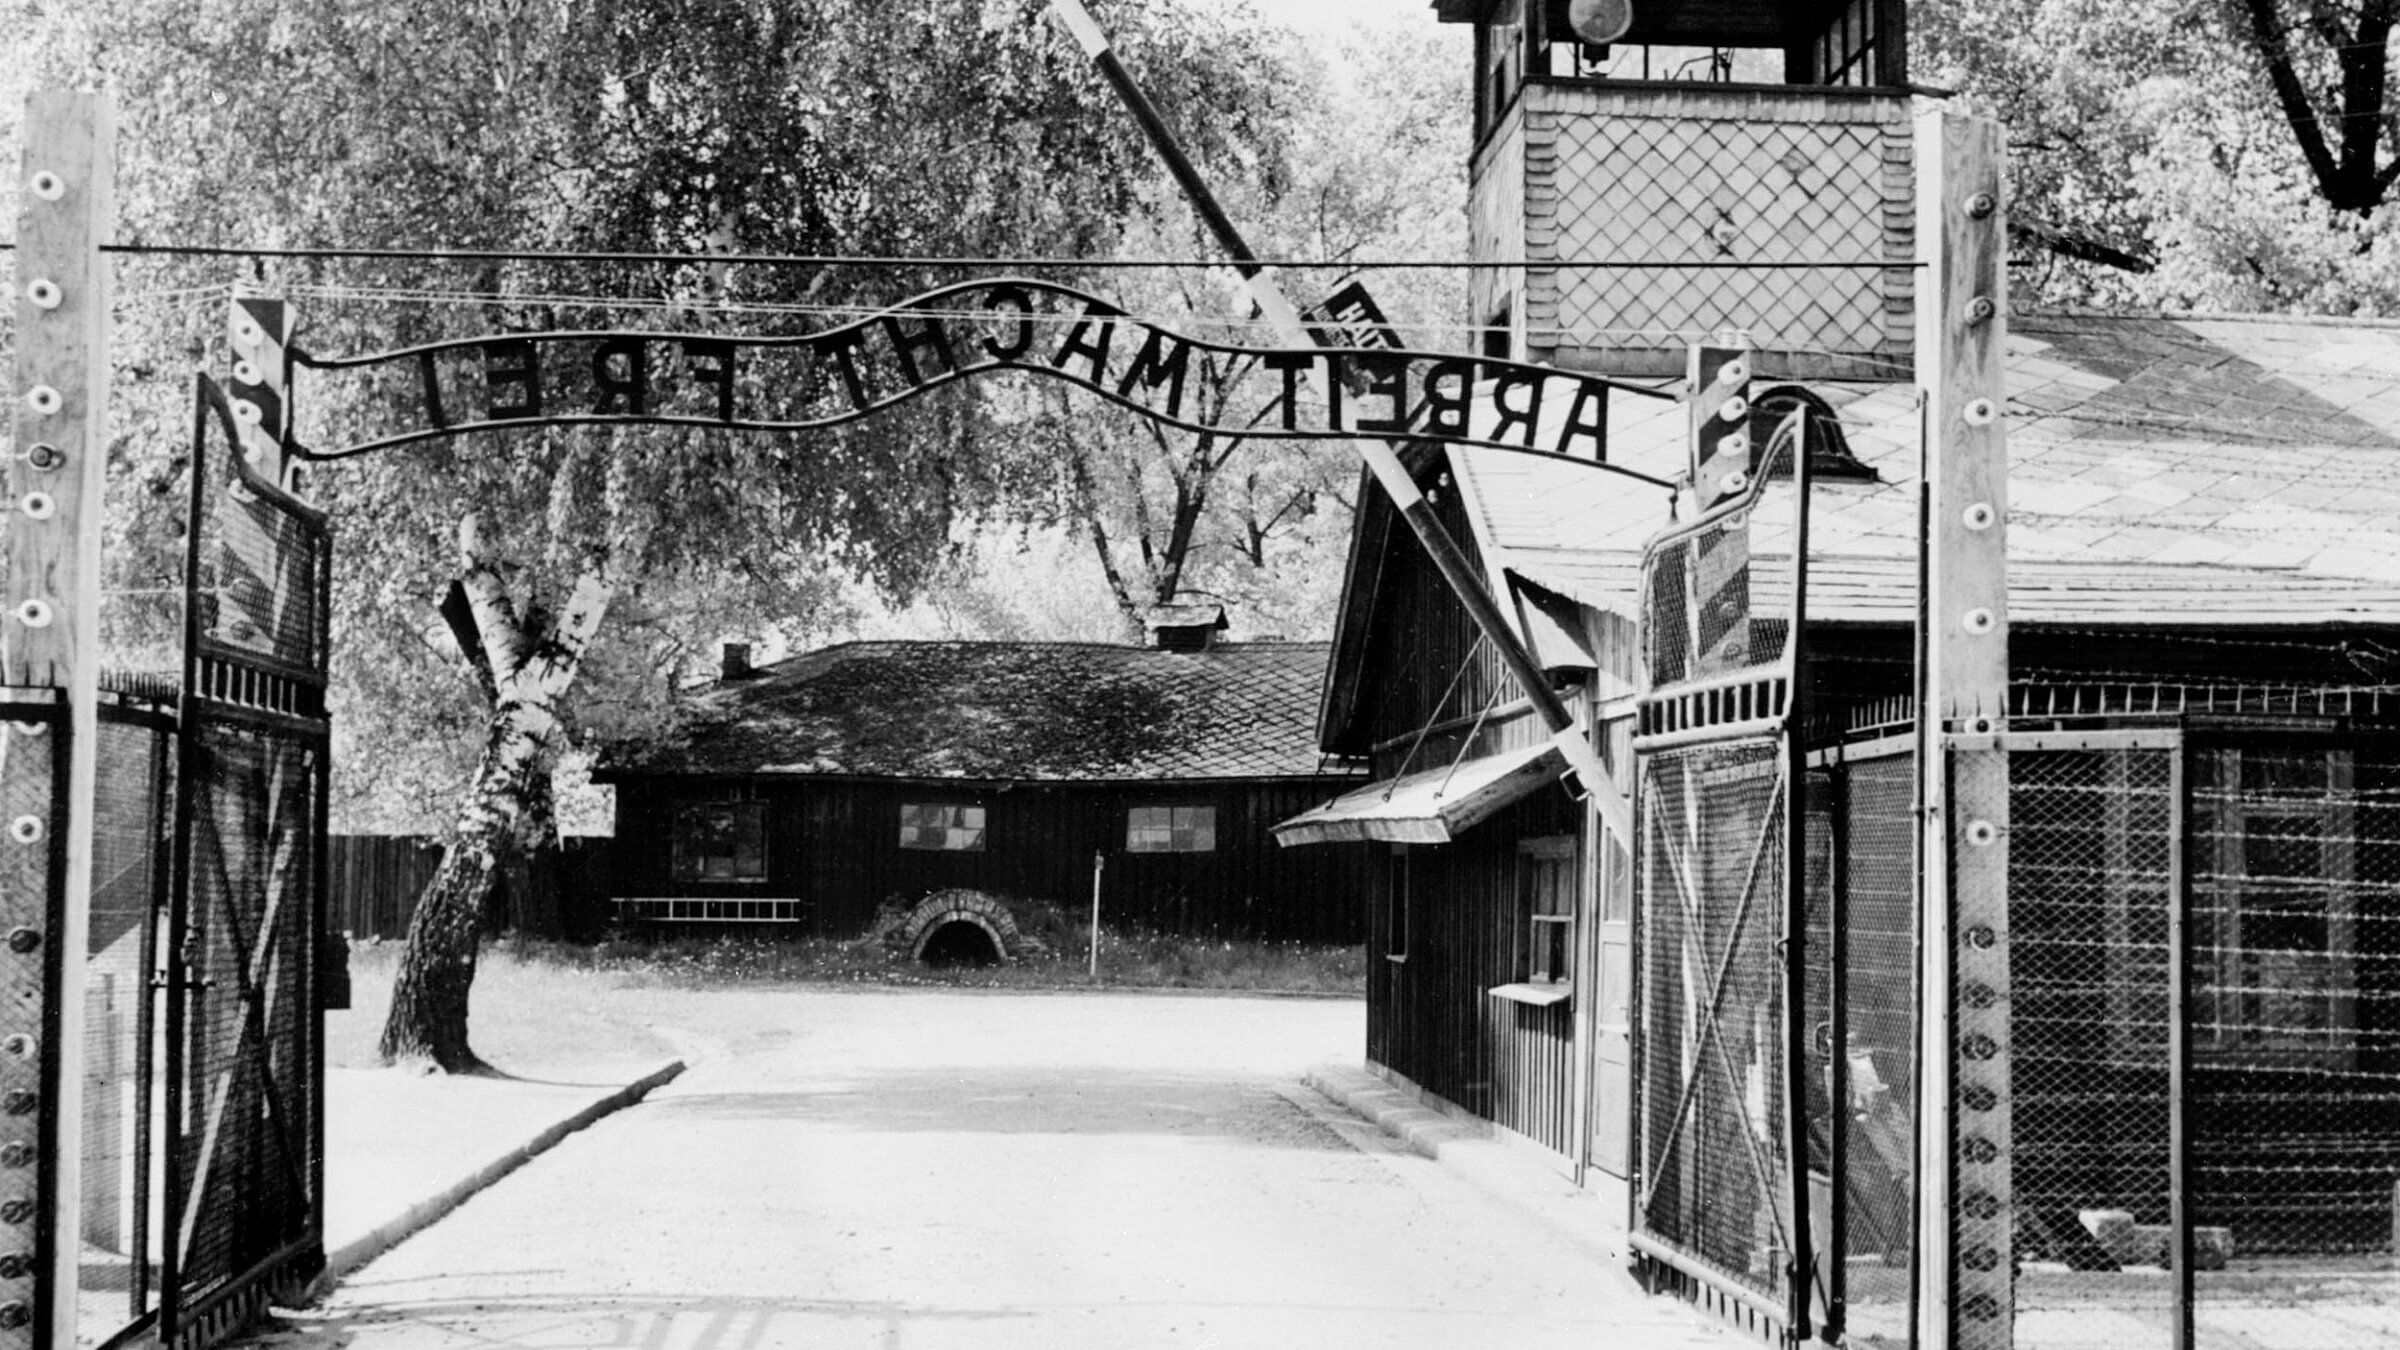 A picture taken in April 1945 depicts Auschwitz concentration camp gate, with the inscription "Arbeit macht frei," after its liberation by Soviet troops in January 1945. A New York City auction house is selling a number of Holocaust-related items, including some from concentration camps like Auschwitz.